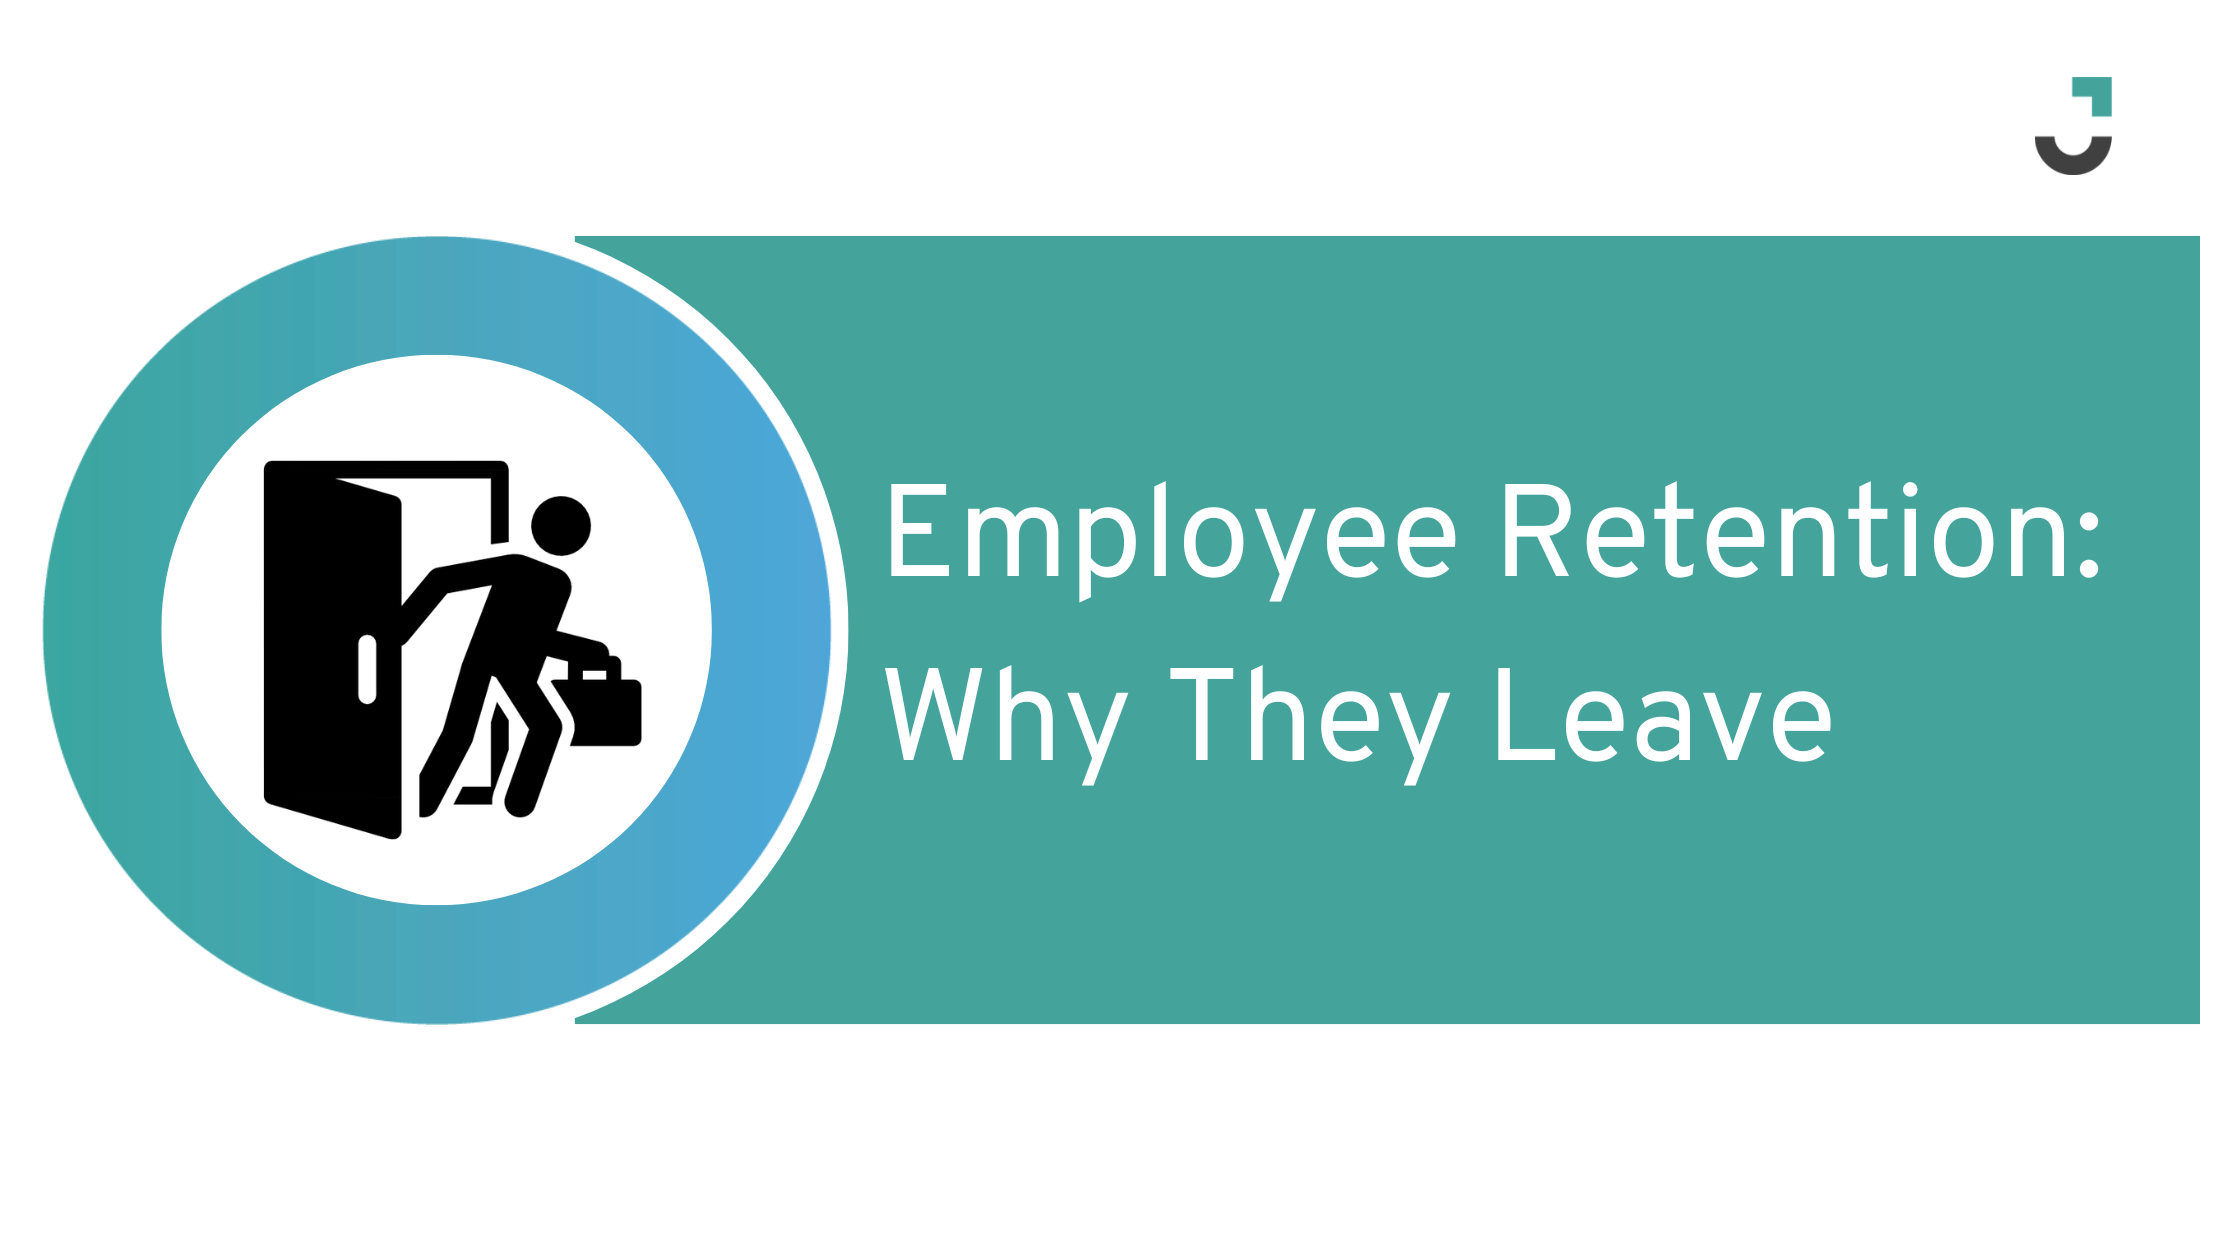 Employee Retention: Why They Leave